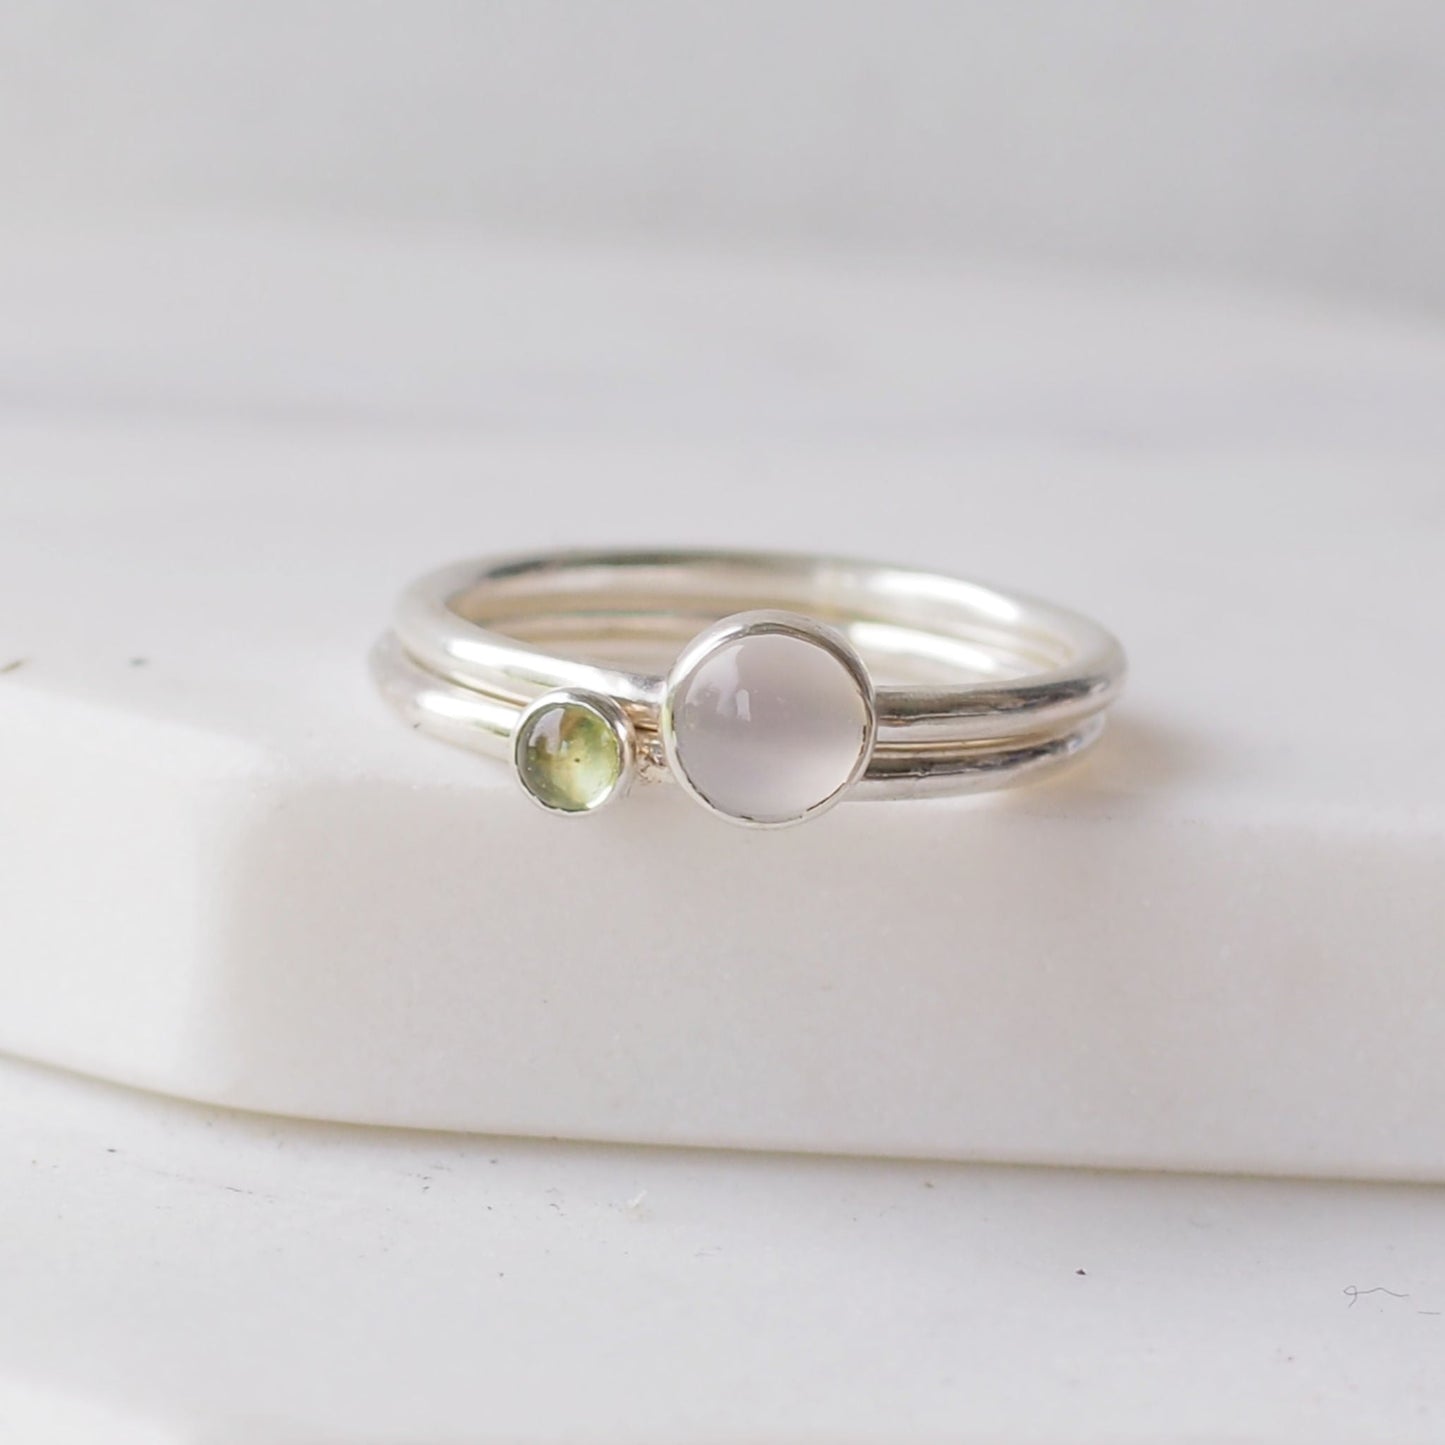 Two silver rings with moonstone and peridot gemstones. Birthstones for June and August. Handmade to your ring size by maram jewellery in Scotland , UK